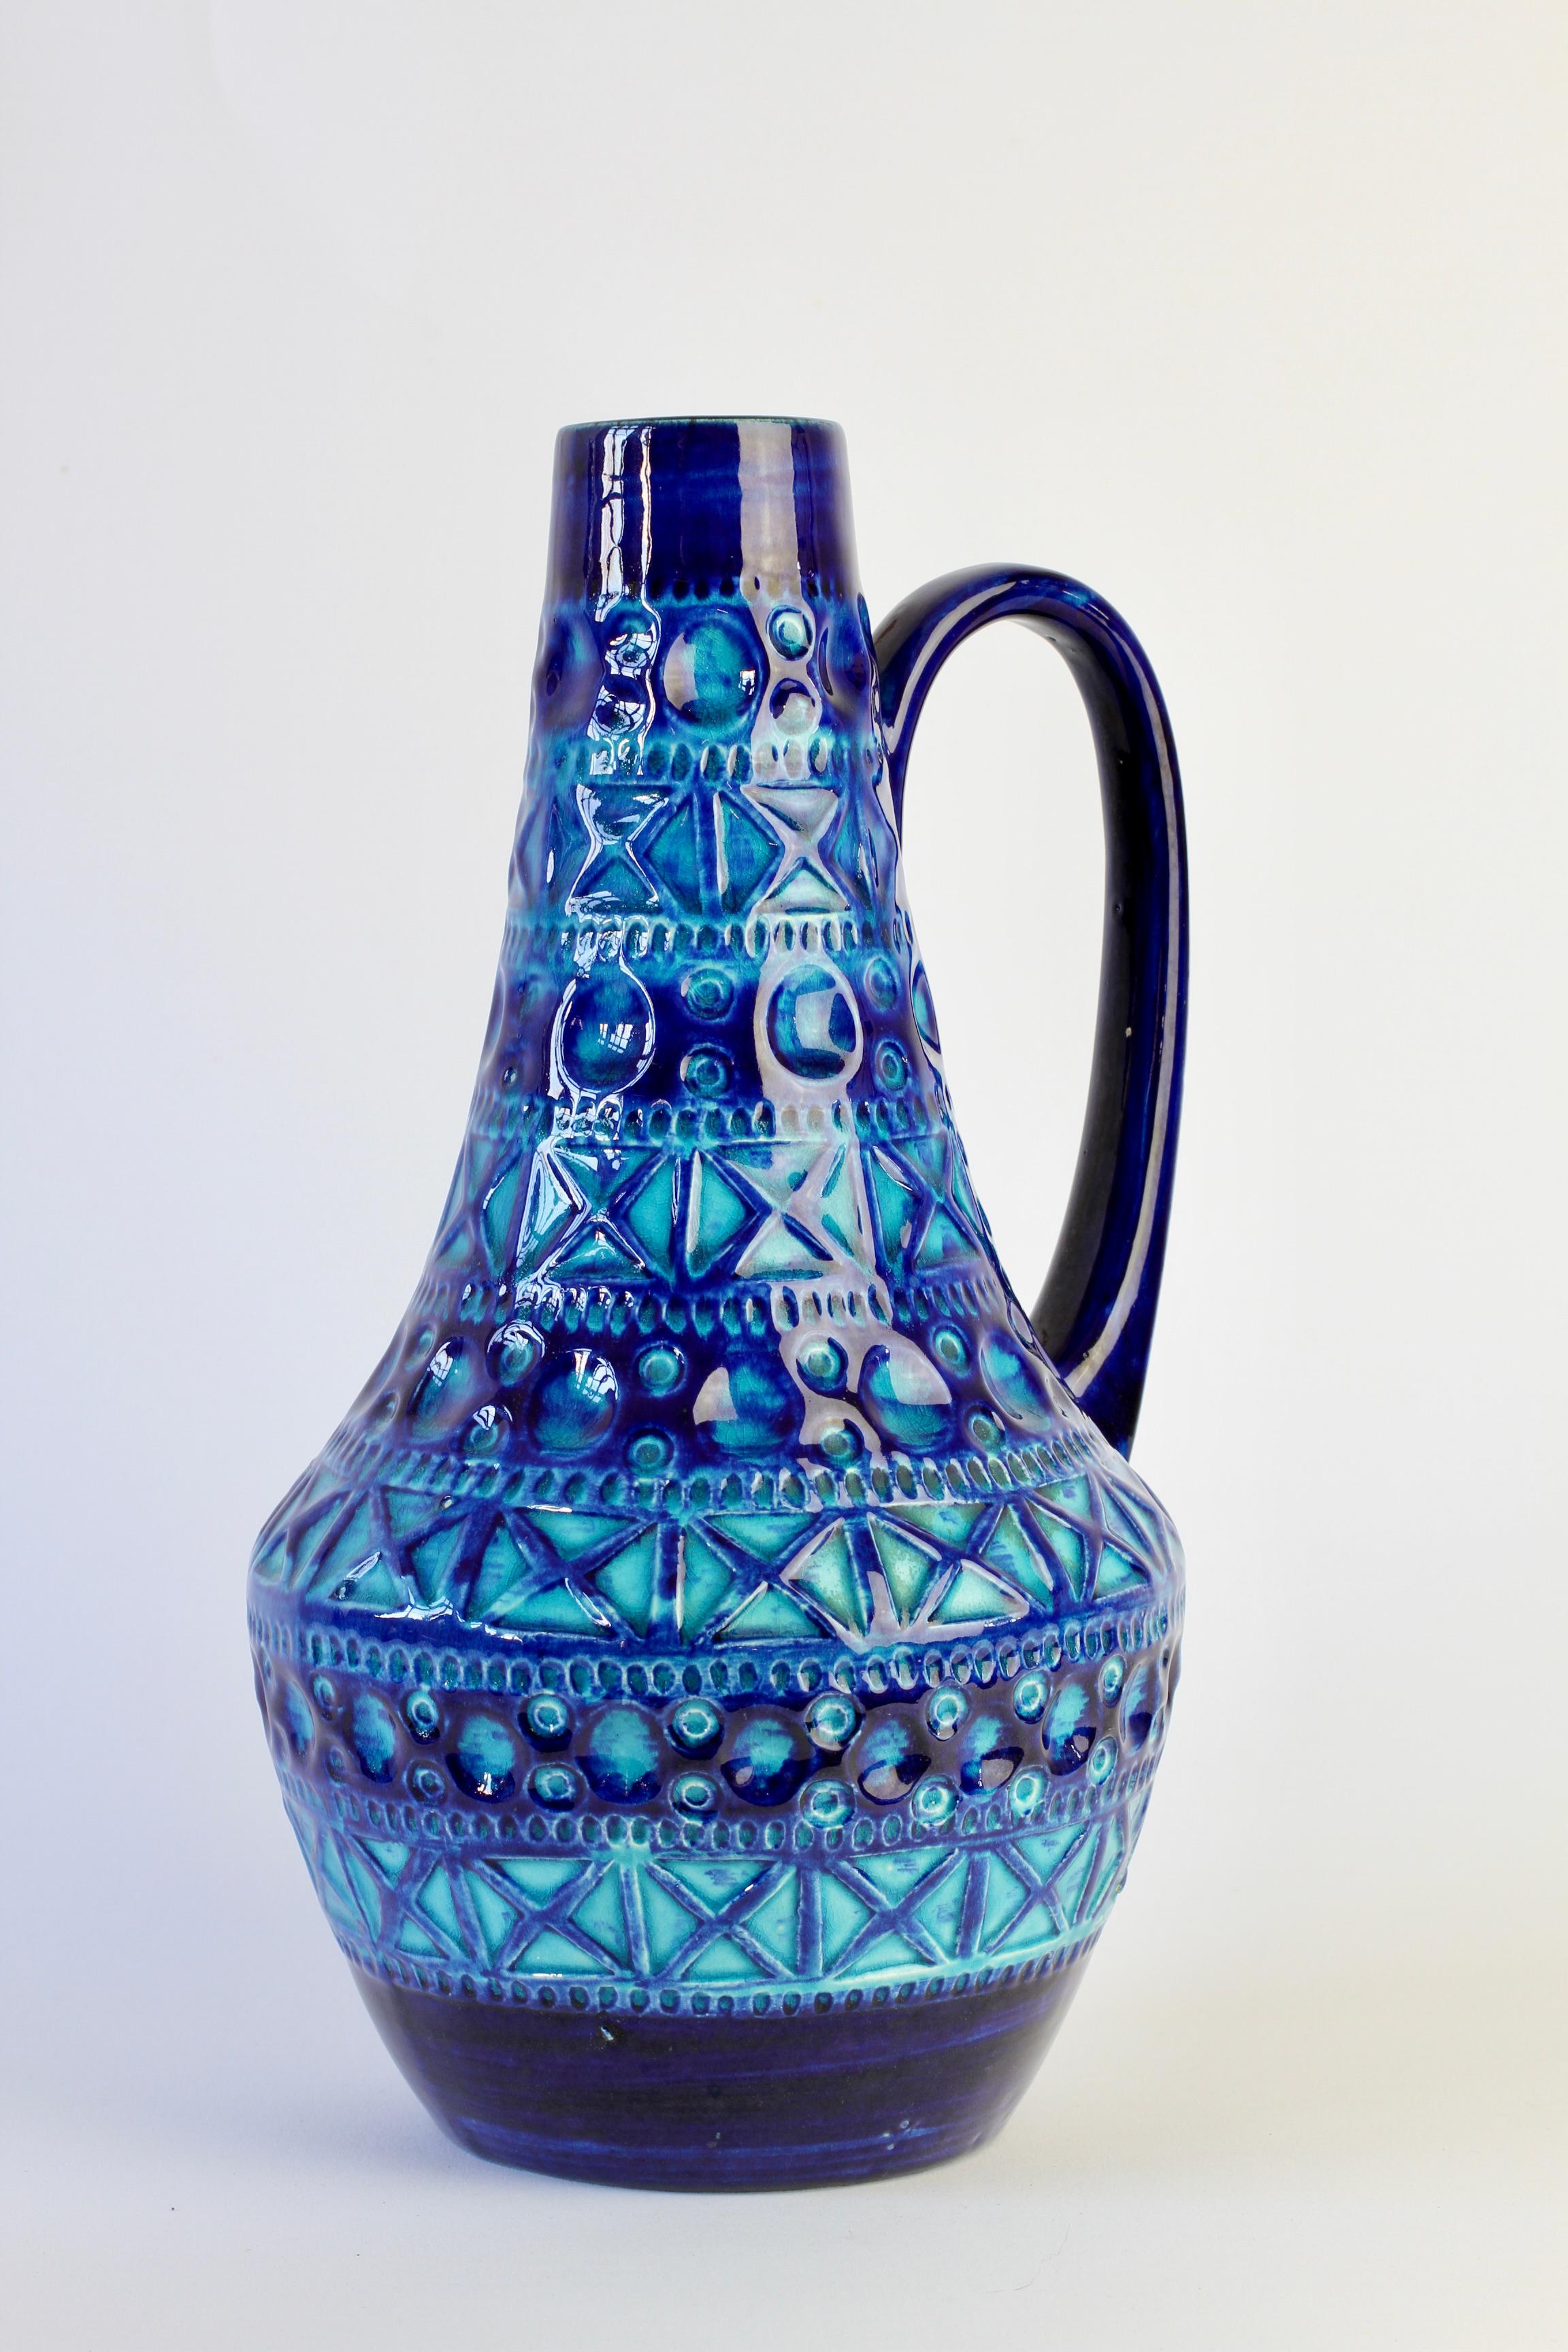 Beautiful vintage vase by Bodo Mans and produced by Bay Keramik in the early to mid-1970s. The Aldo Londi for Bitossi style relief pattern, captured in 'Rhimini' blue and aquamarine / turquoise has a quintessentially vintage. 1970s vibe whilst